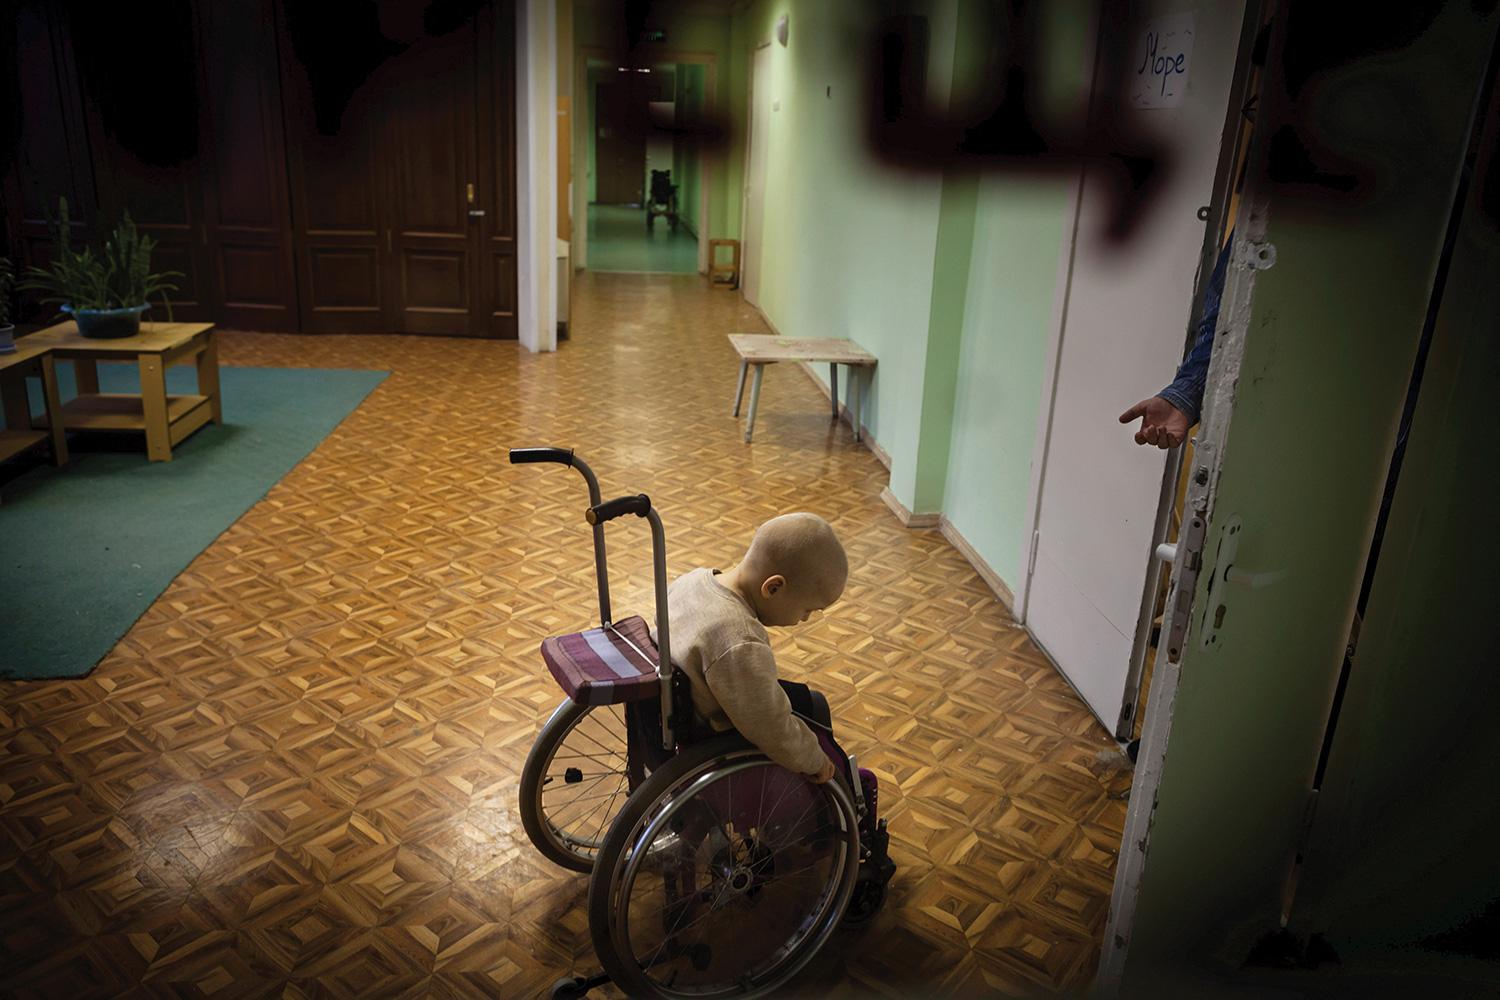 A child in a Russian state orphanage for children with disabilities.